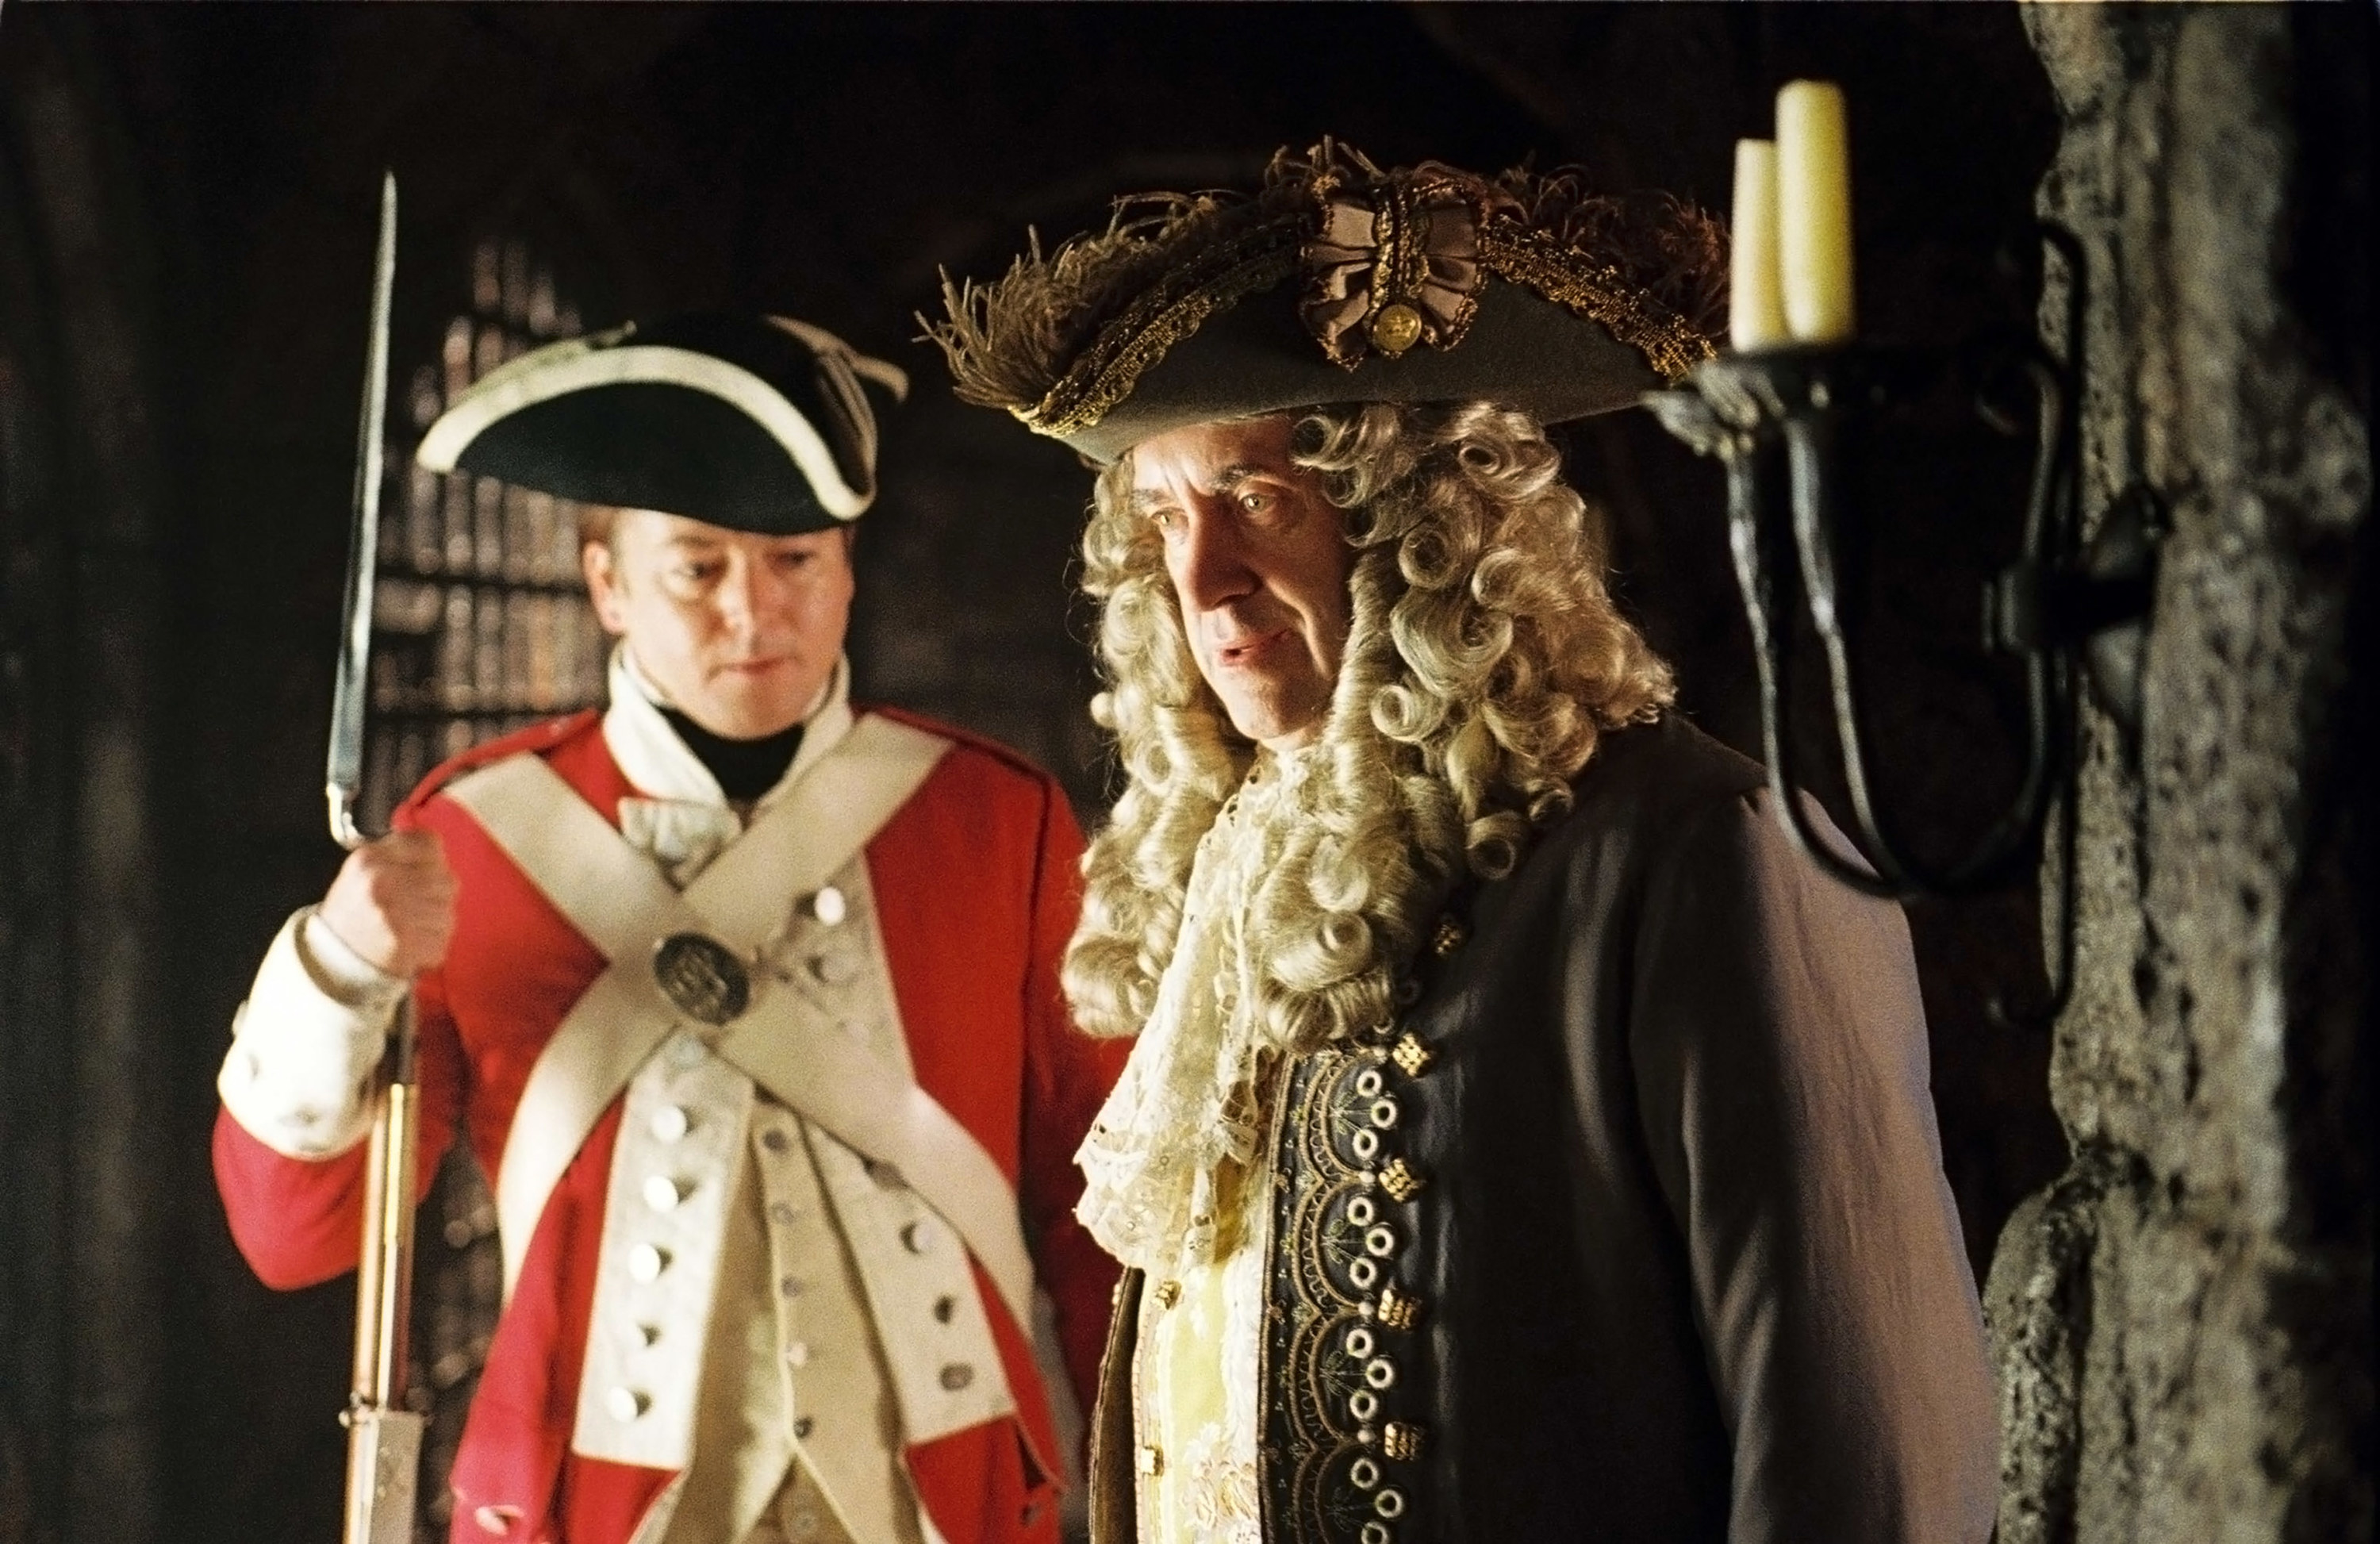 the governor and a soldier in the film